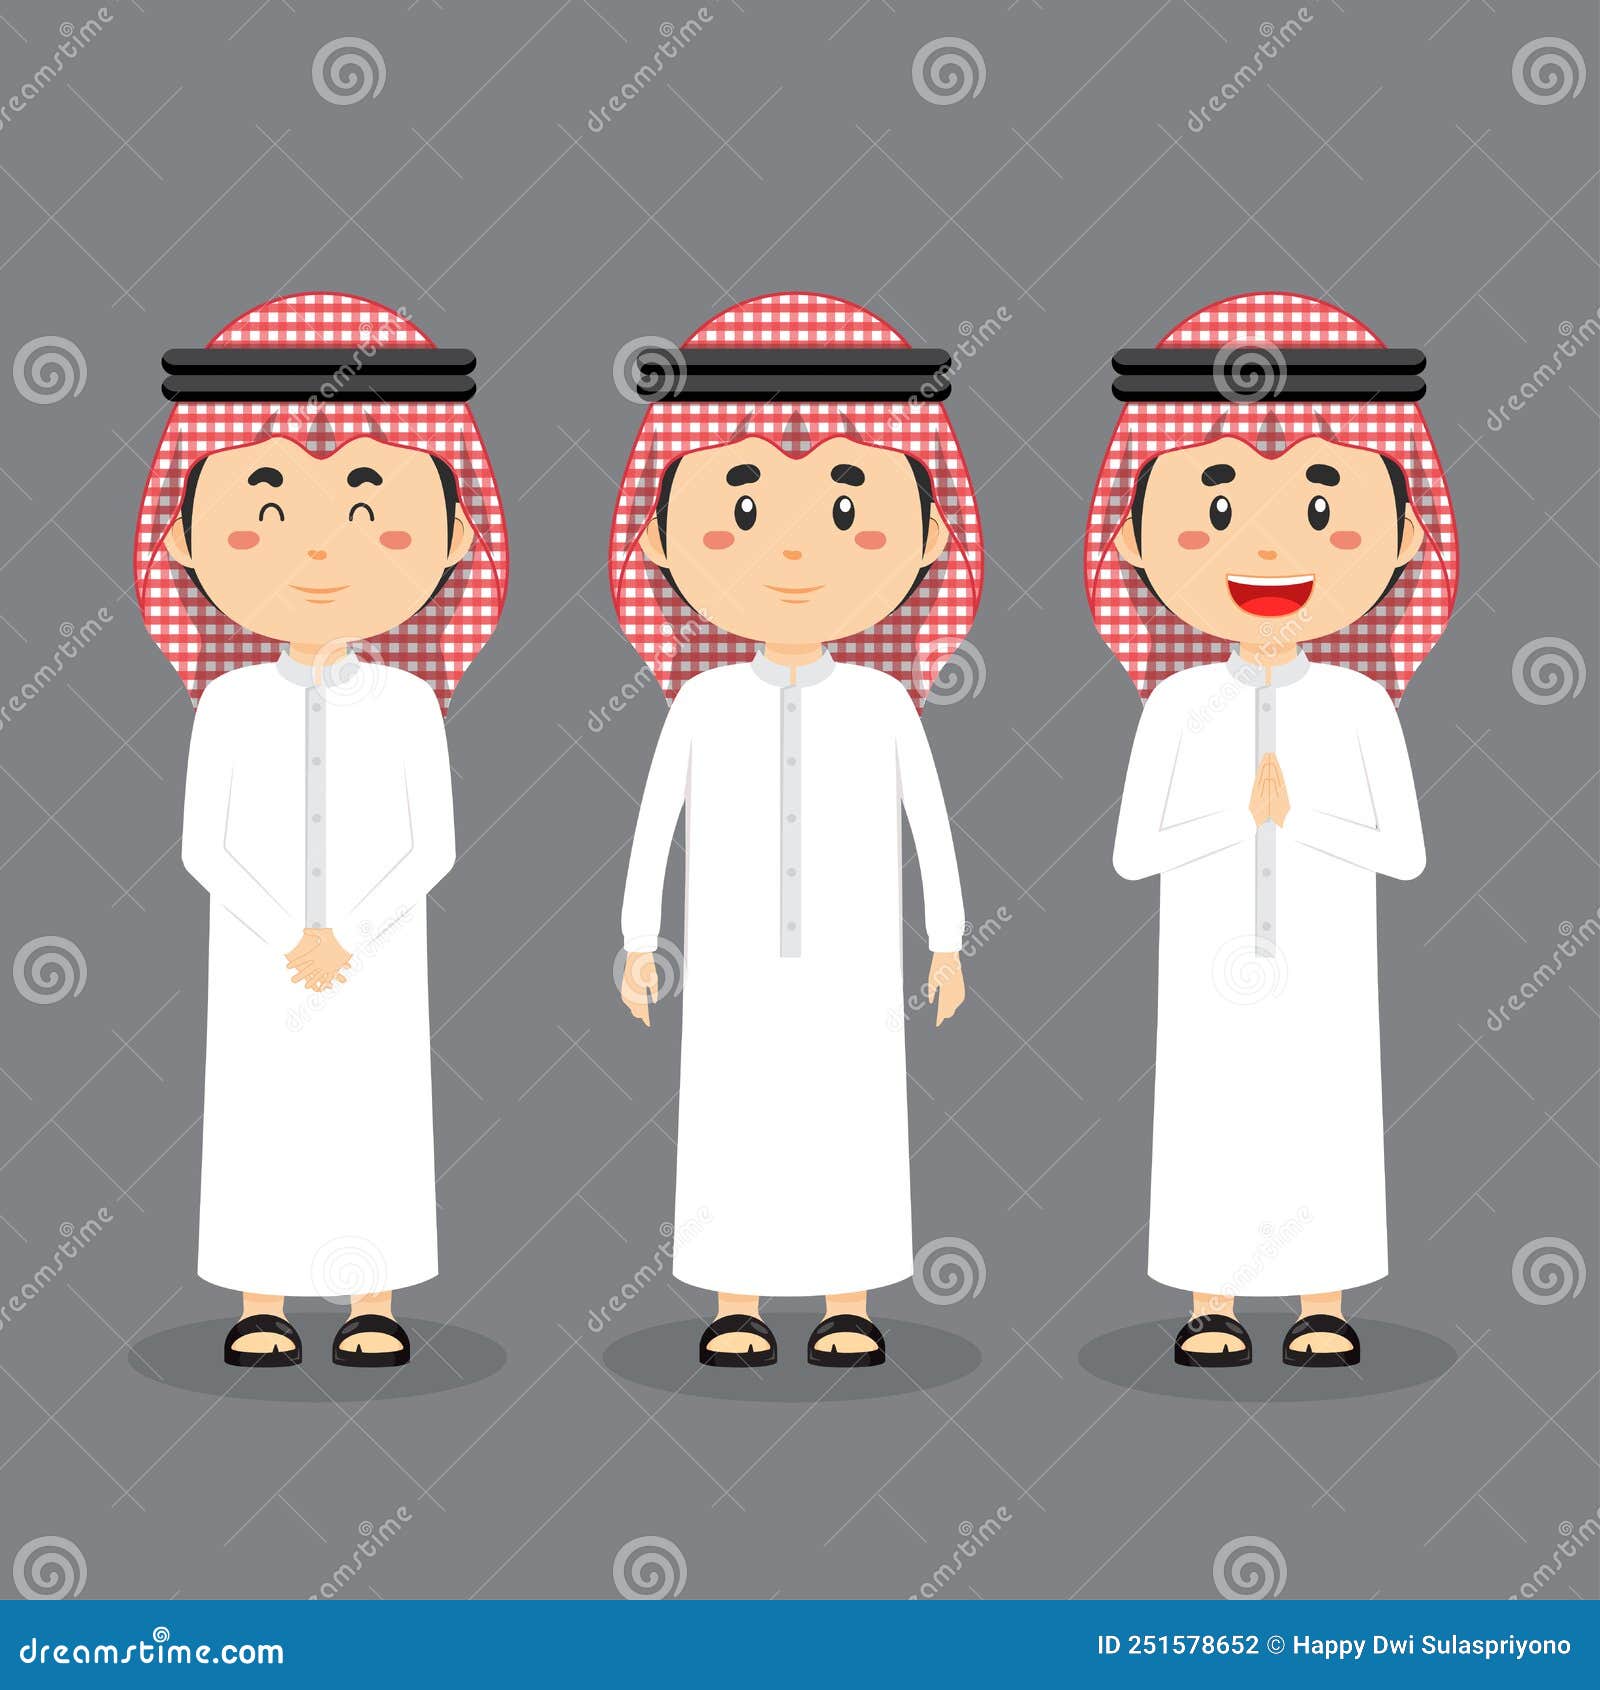 jordania character with various expression